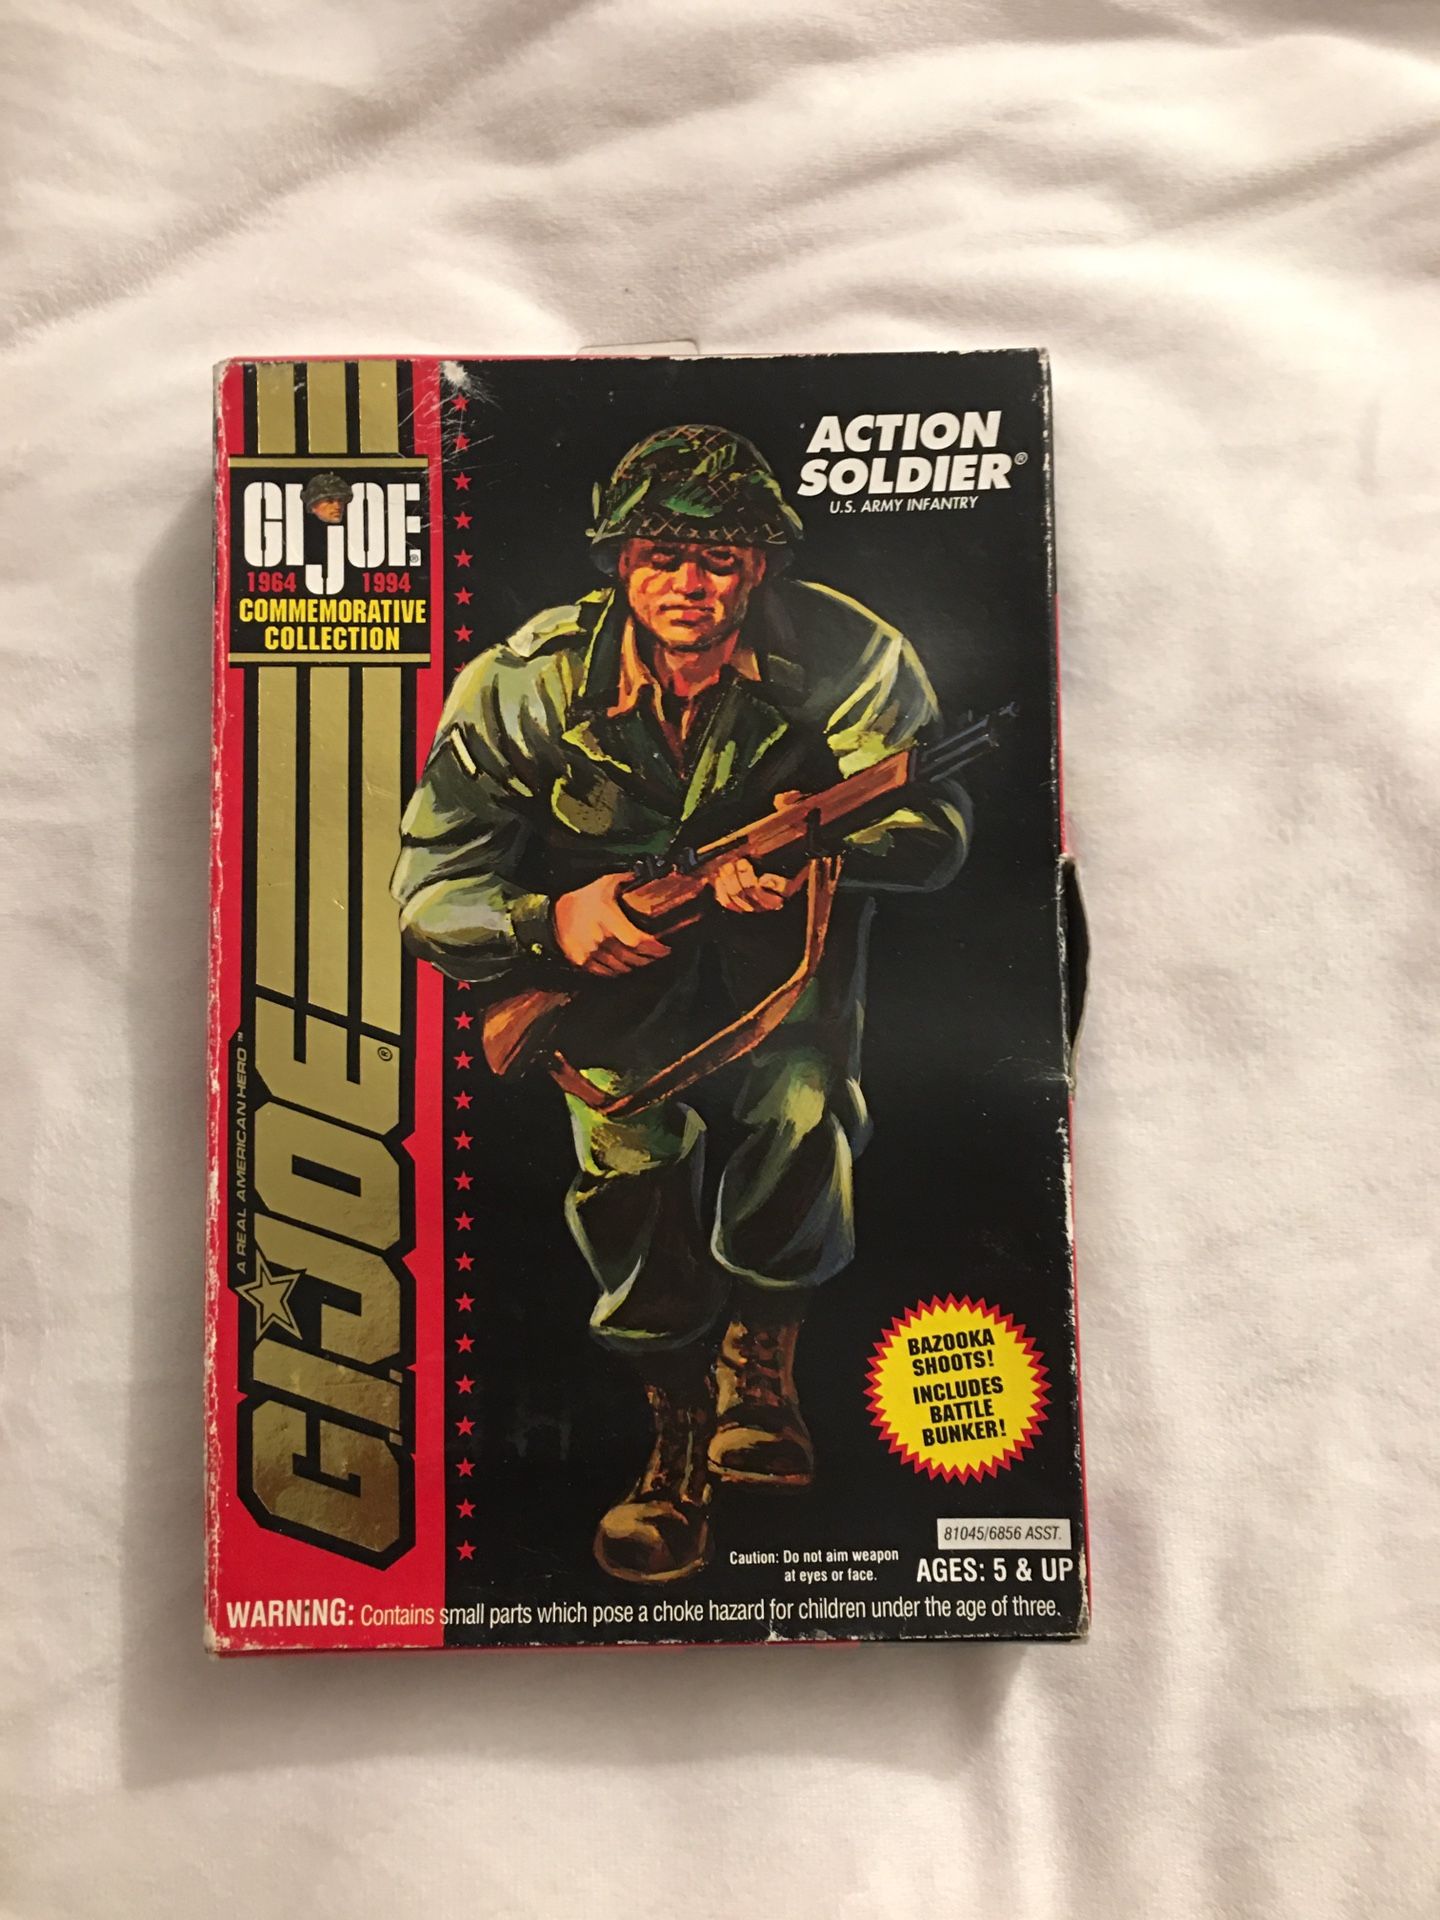 Vintage G I Joe 30yrs commemorative collection US action soldier